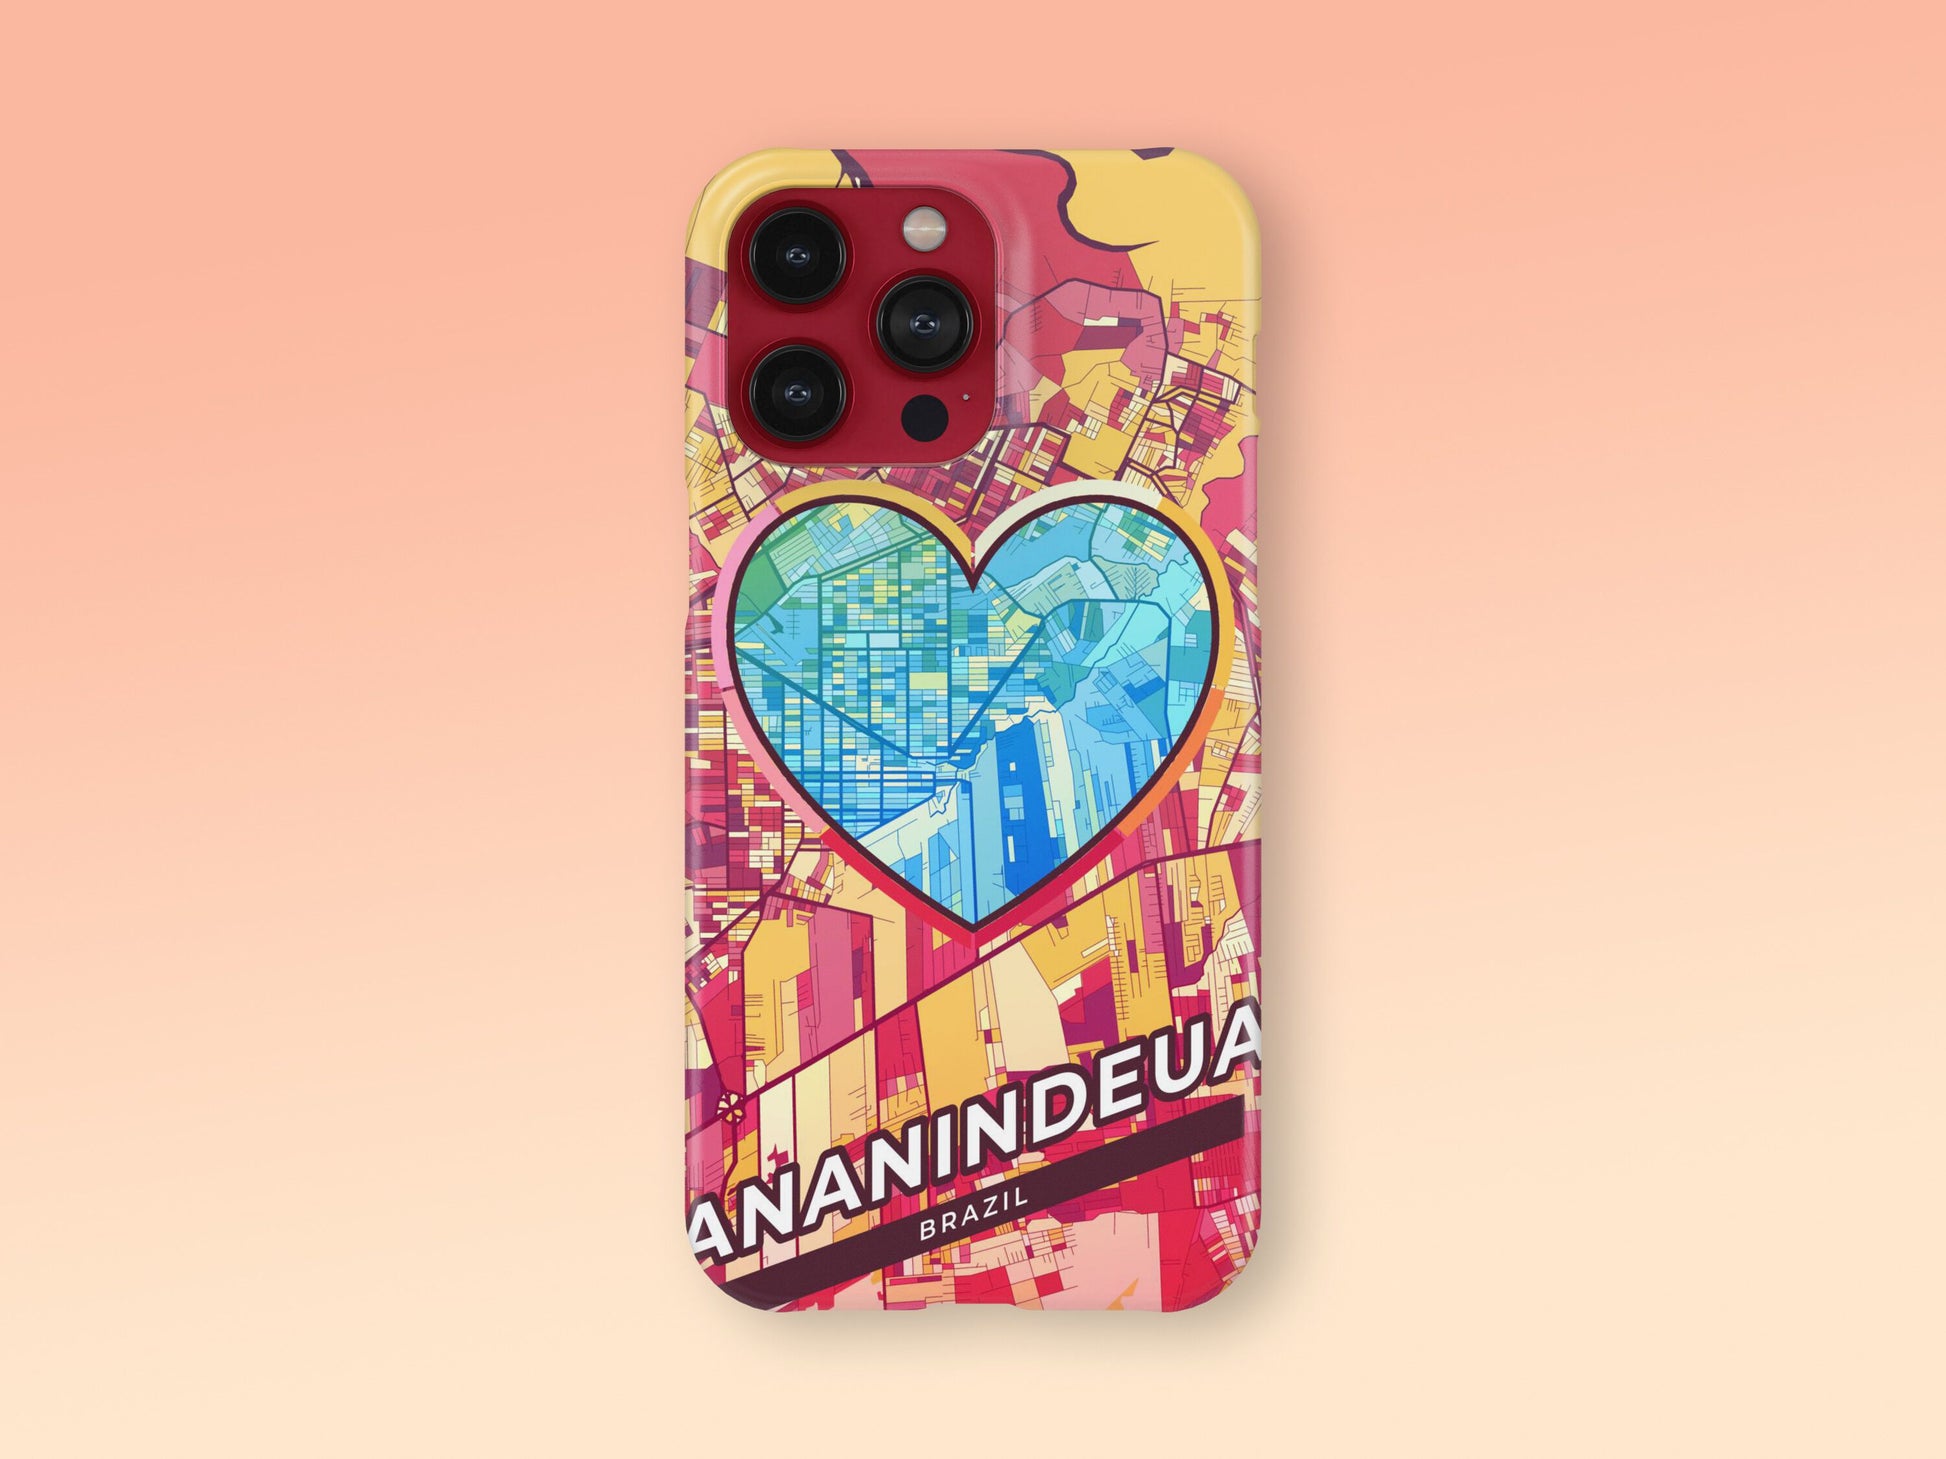 Ananindeua Brazil slim phone case with colorful icon. Birthday, wedding or housewarming gift. Couple match cases. 2